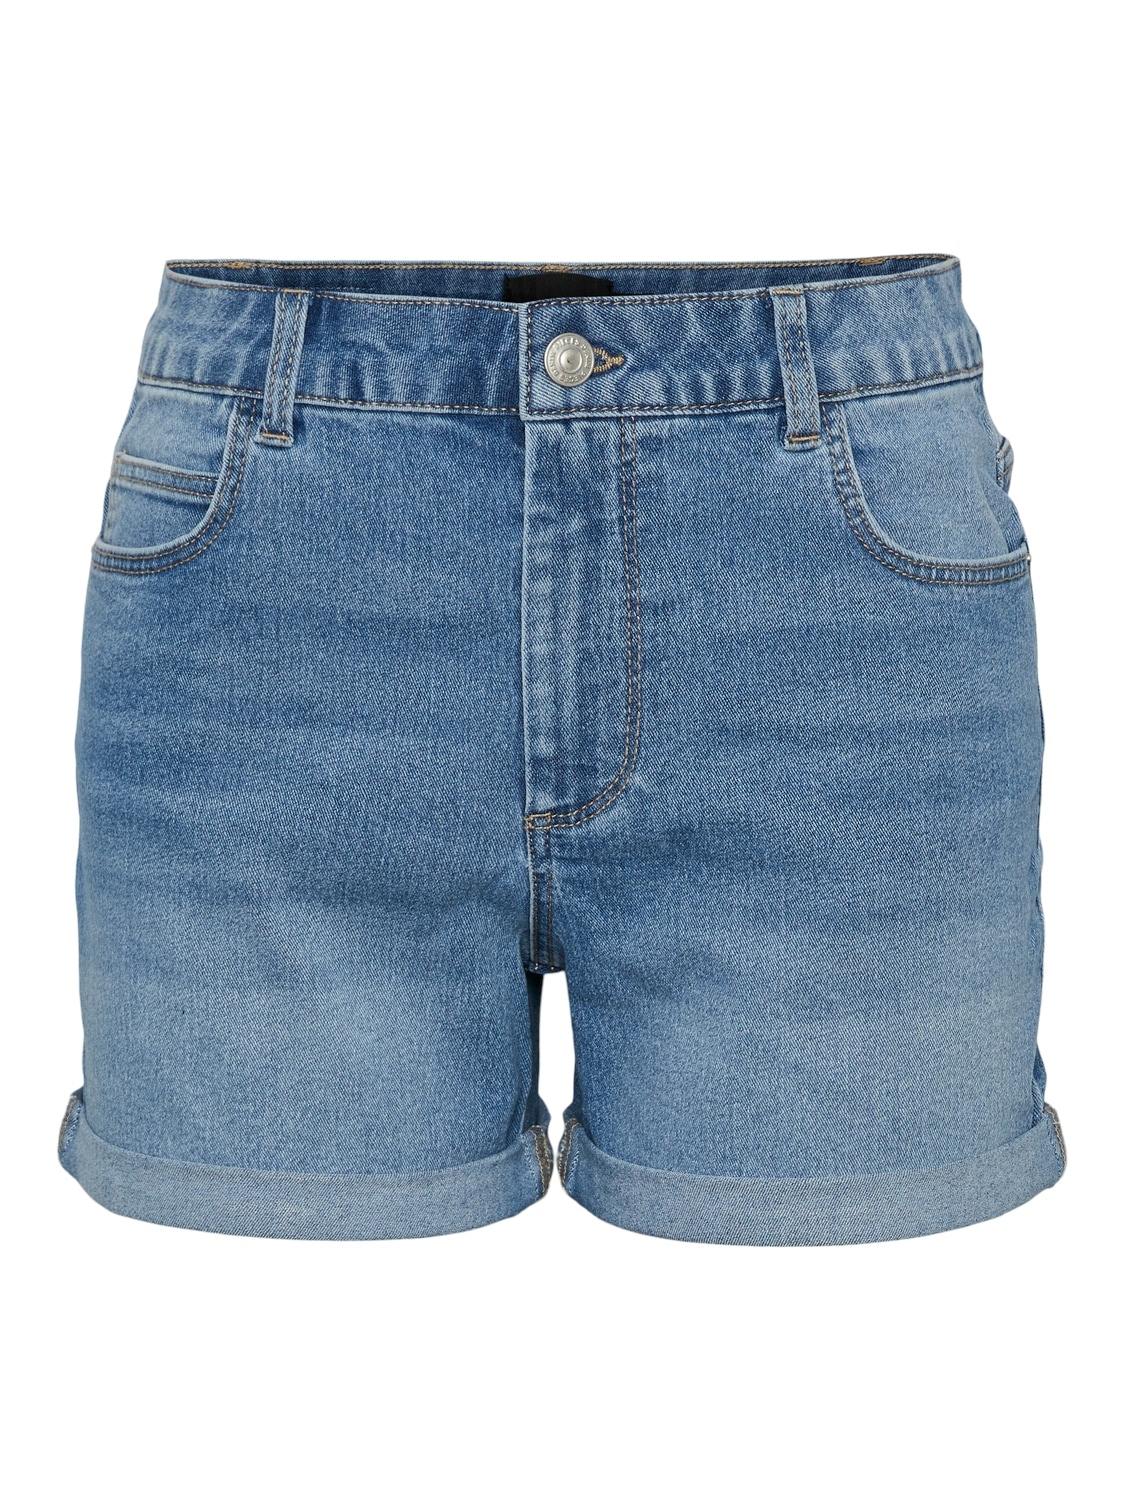 pieces Jeansshorts »PCPEGGY MW SHORTS LB NOOS BC«